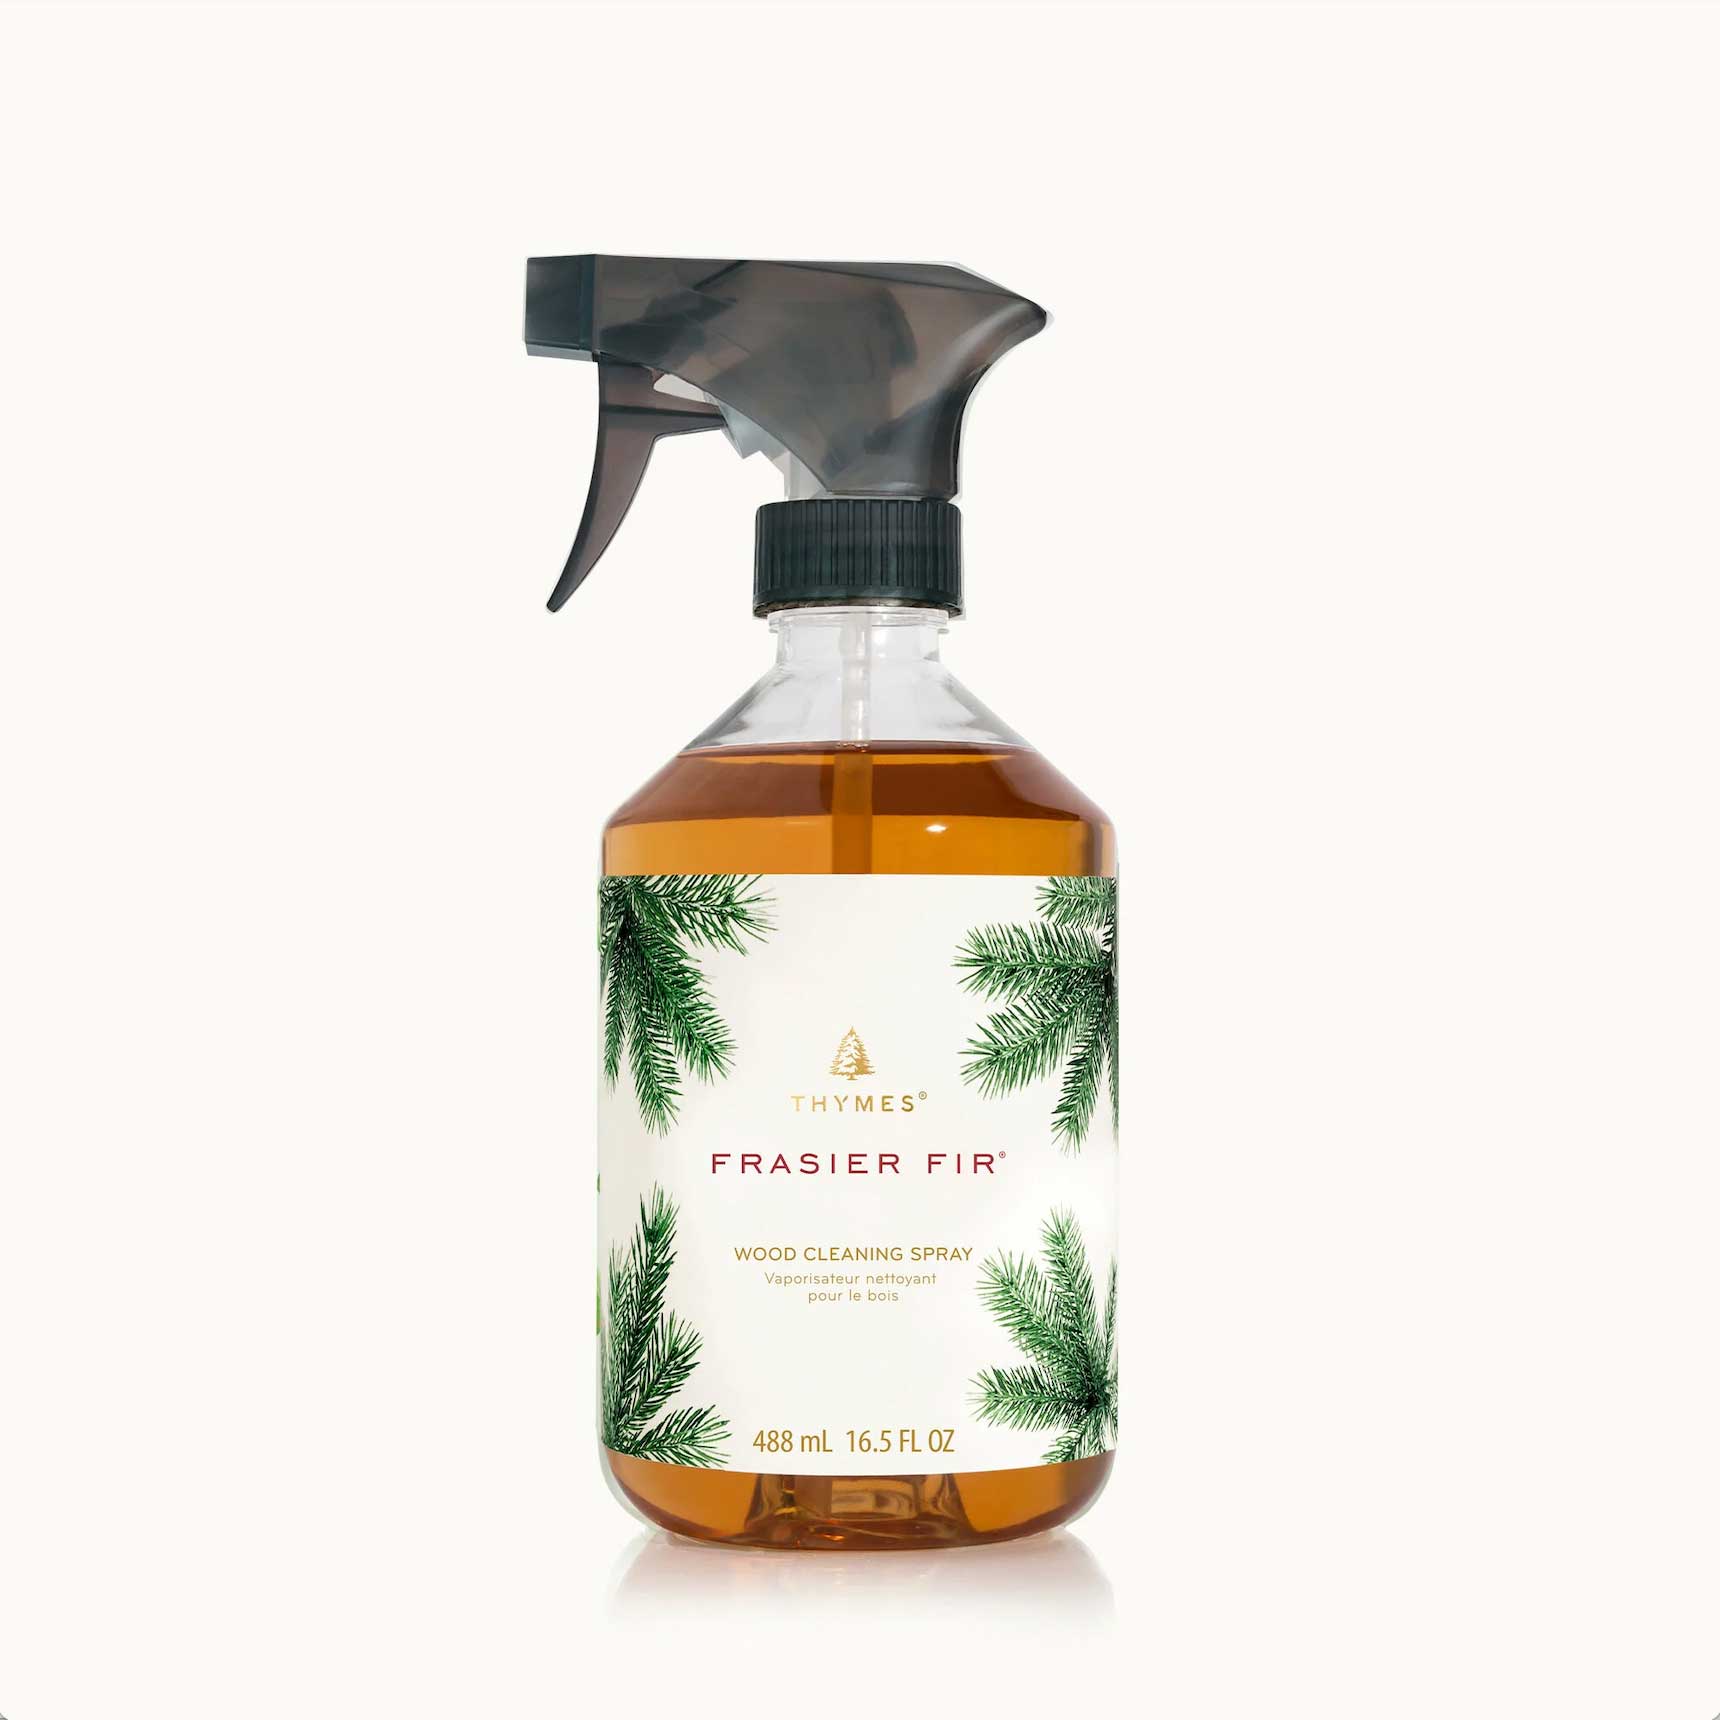 Thymes Frasier Fir Wood Cleaning Spray on Countertop image number 1 Woman using Thymes Frasier Fir Wood Cleaning Spray image number 2 Basket of Thymes Frasier Fir Home Care Products image number 3 Frasier Fir Wood Cleaning Spray